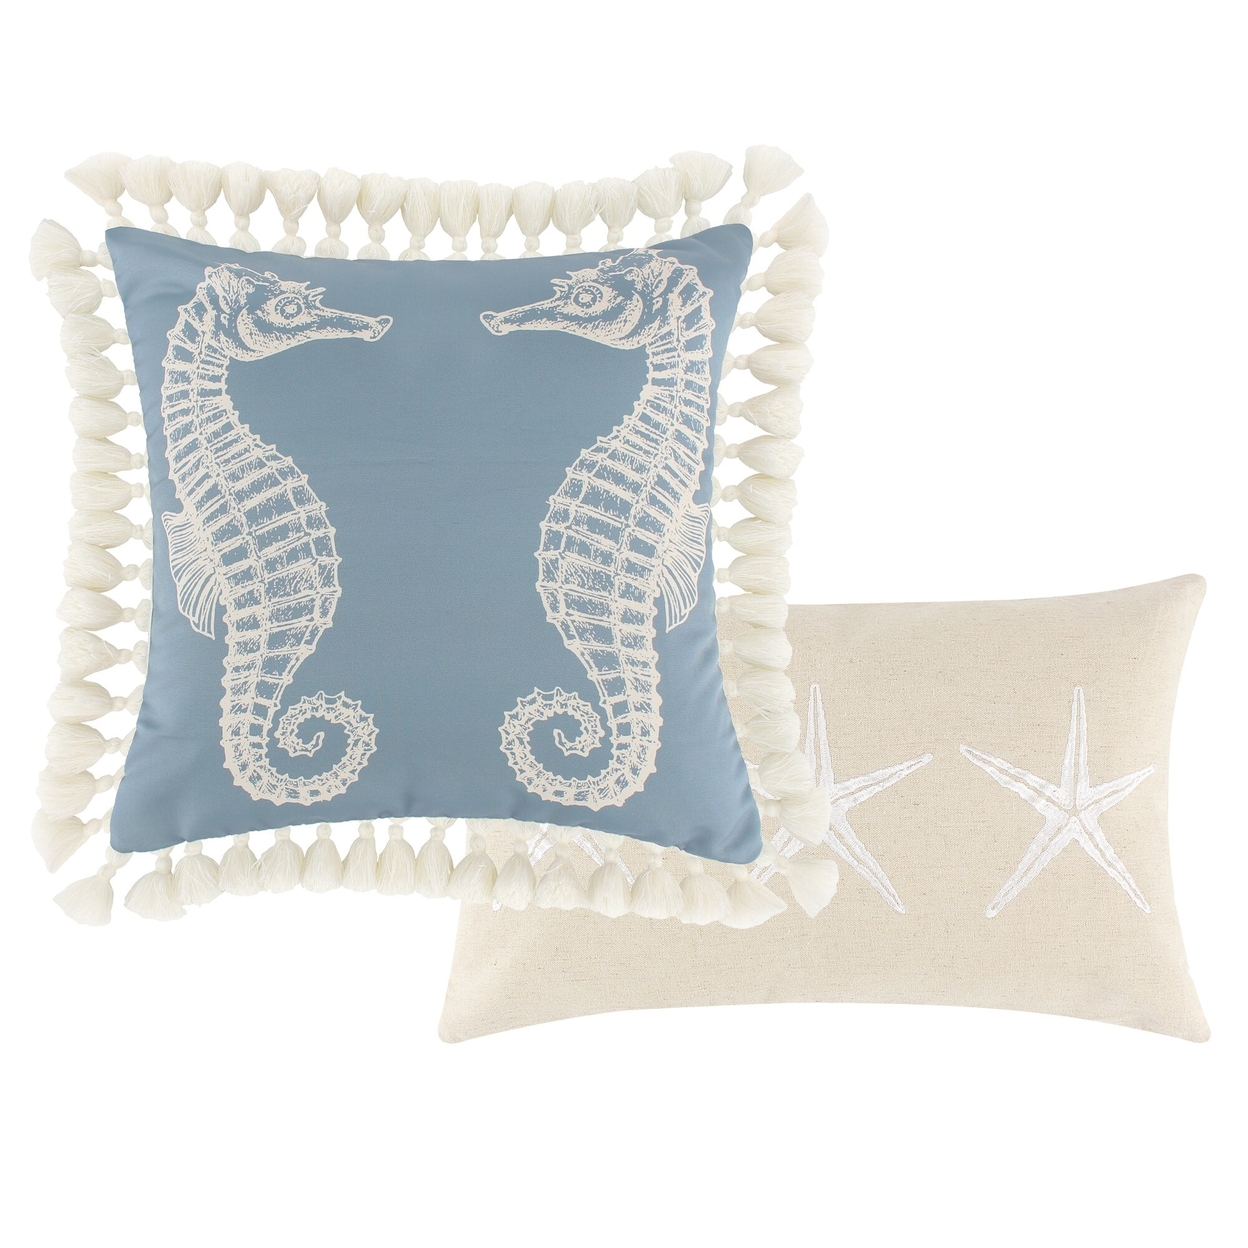 Polyester Throw Pillows, Stitched Seahorse And Starfish Design, Set Of 2, White Tassels, Blue, Beige